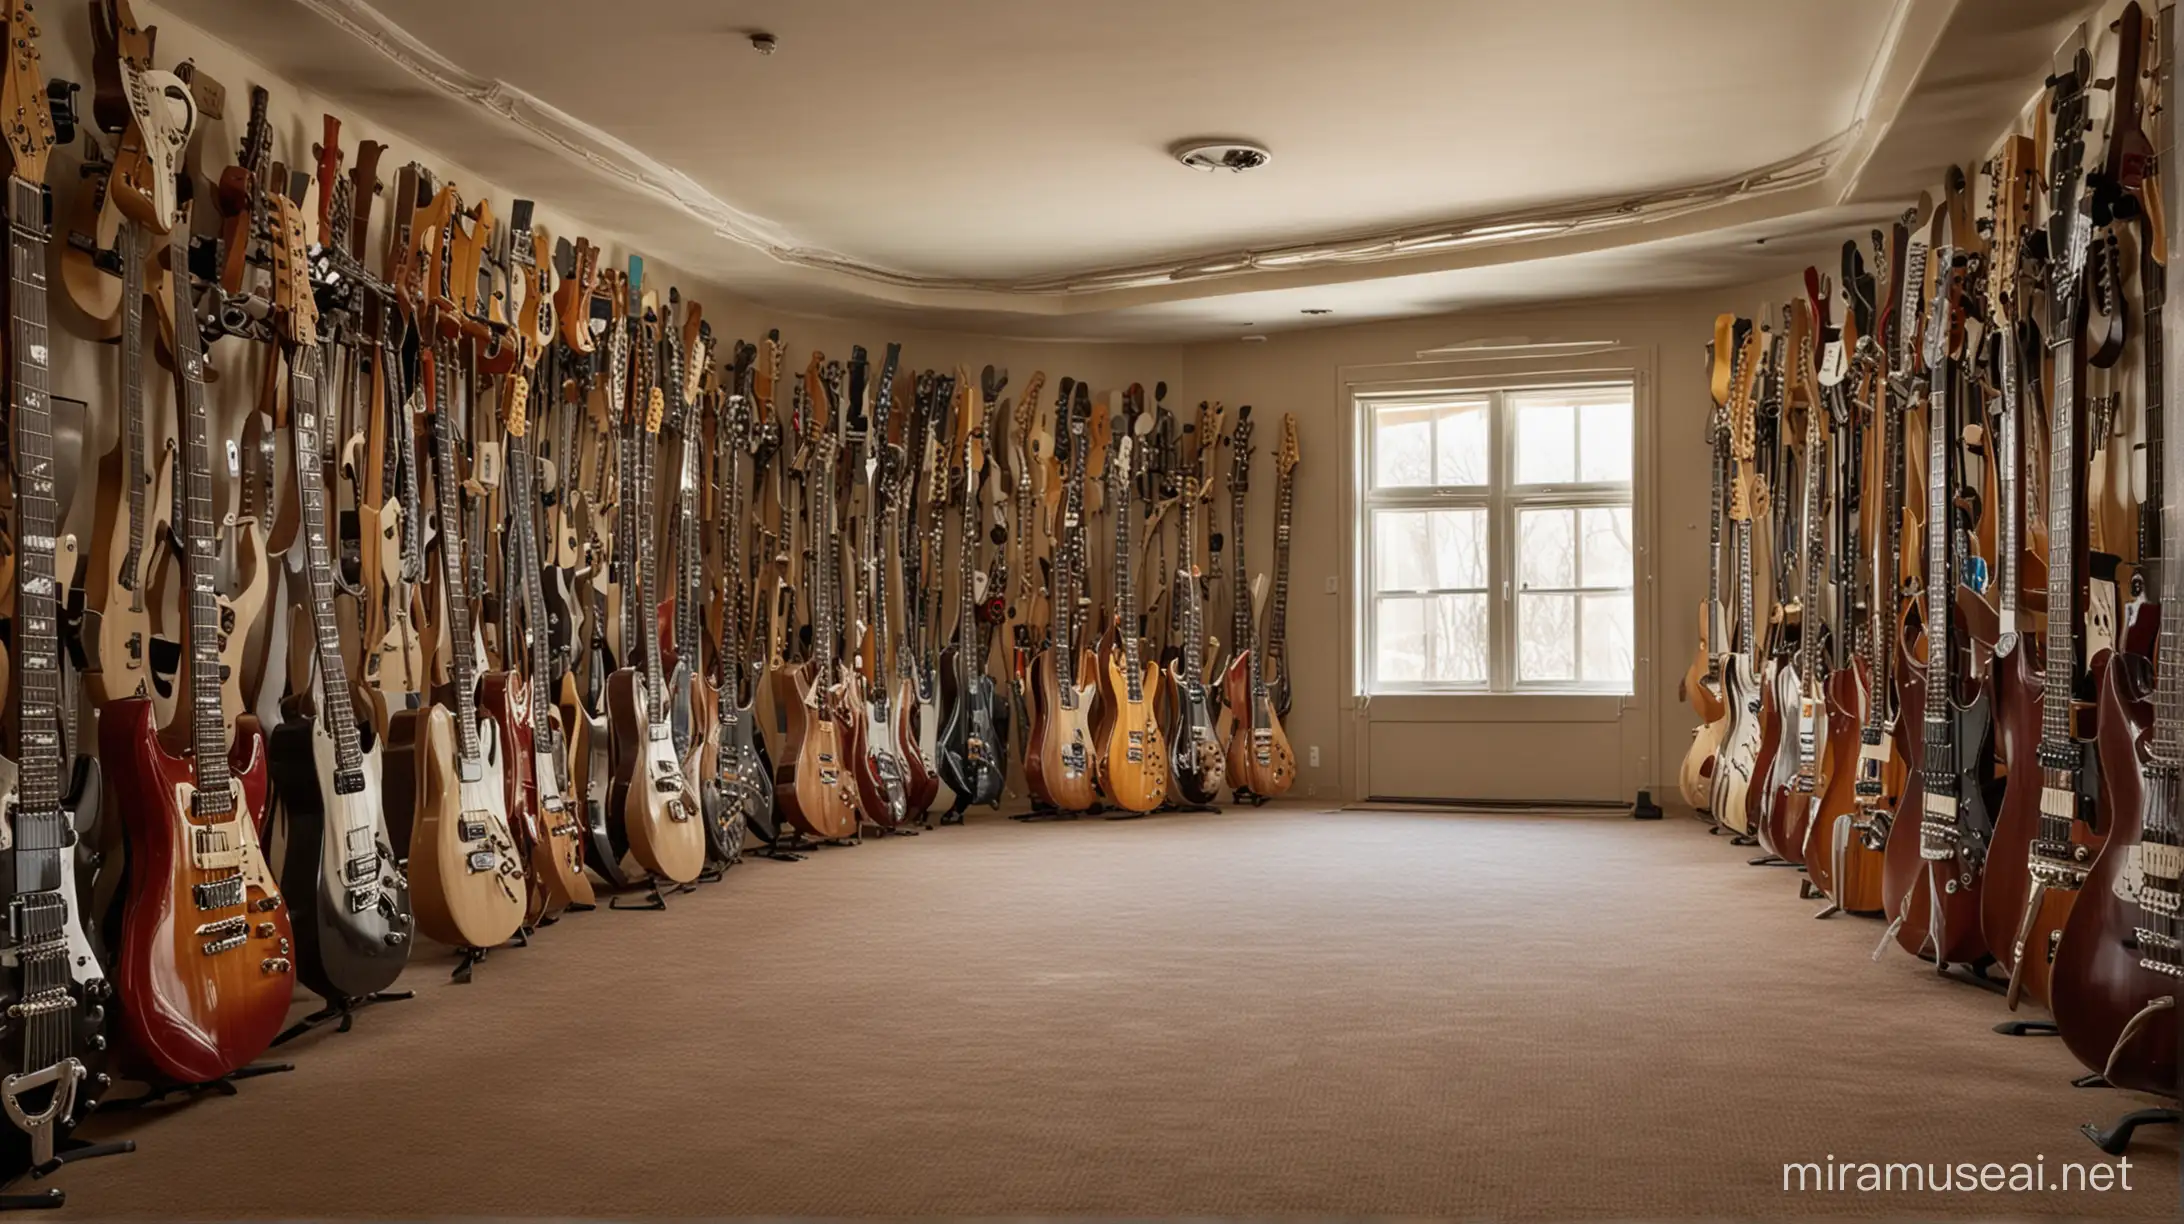 Guitar Room Interior Musical Haven with Strings